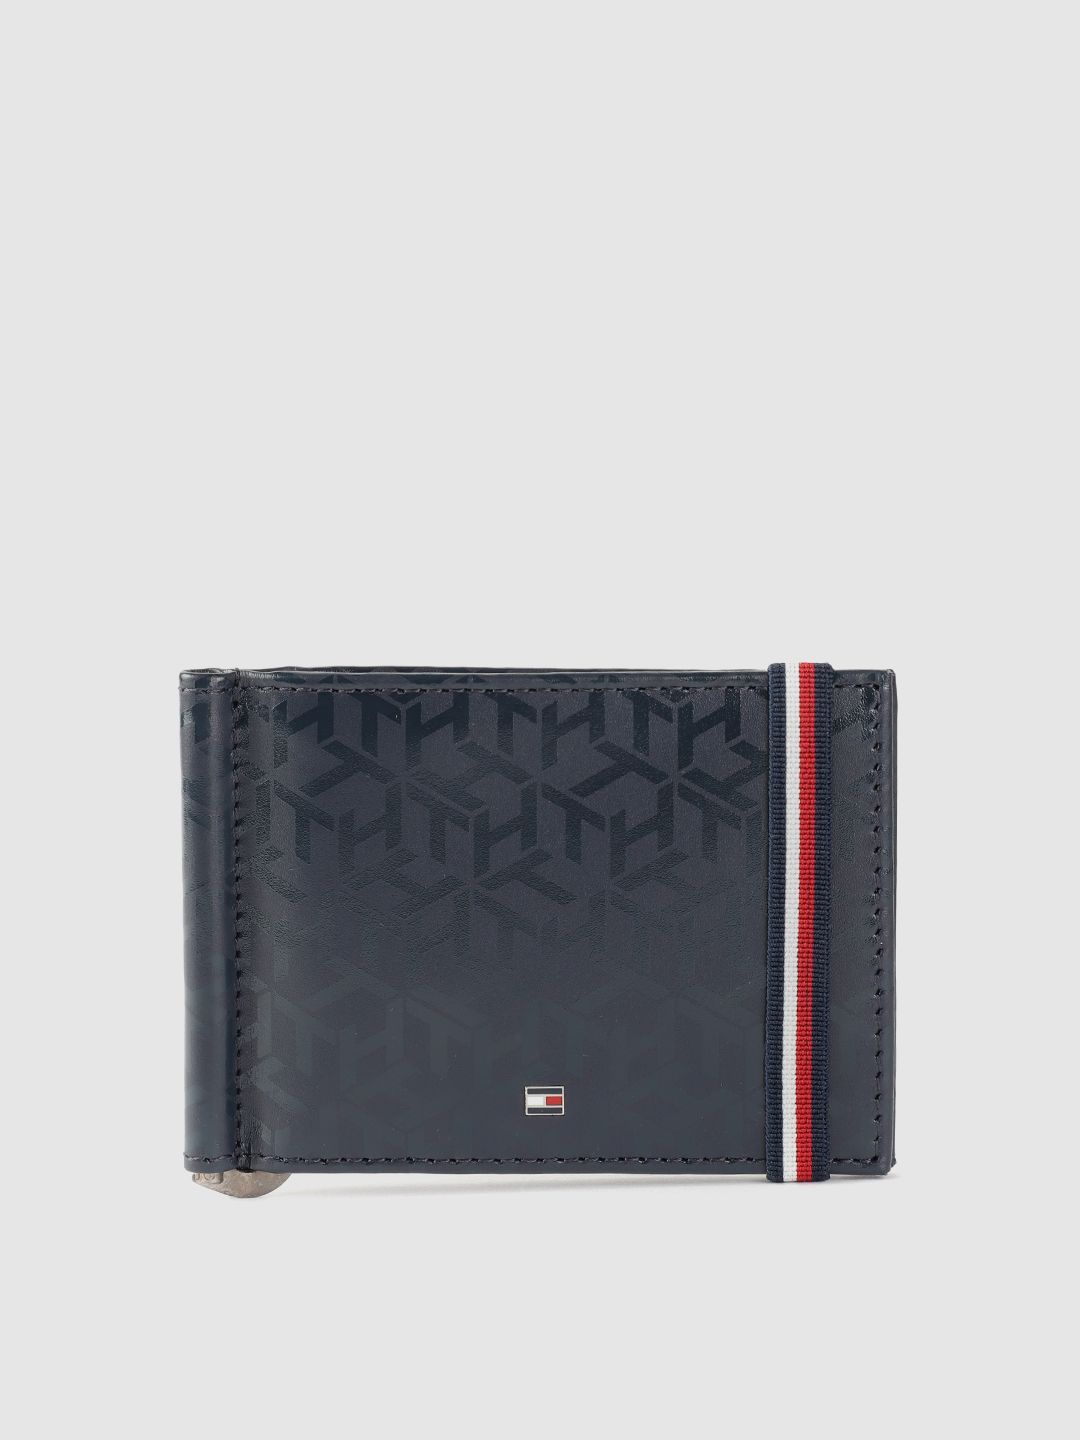 Hilfiger Men Navy Blue Abstract Printed Leather Money Clip - History